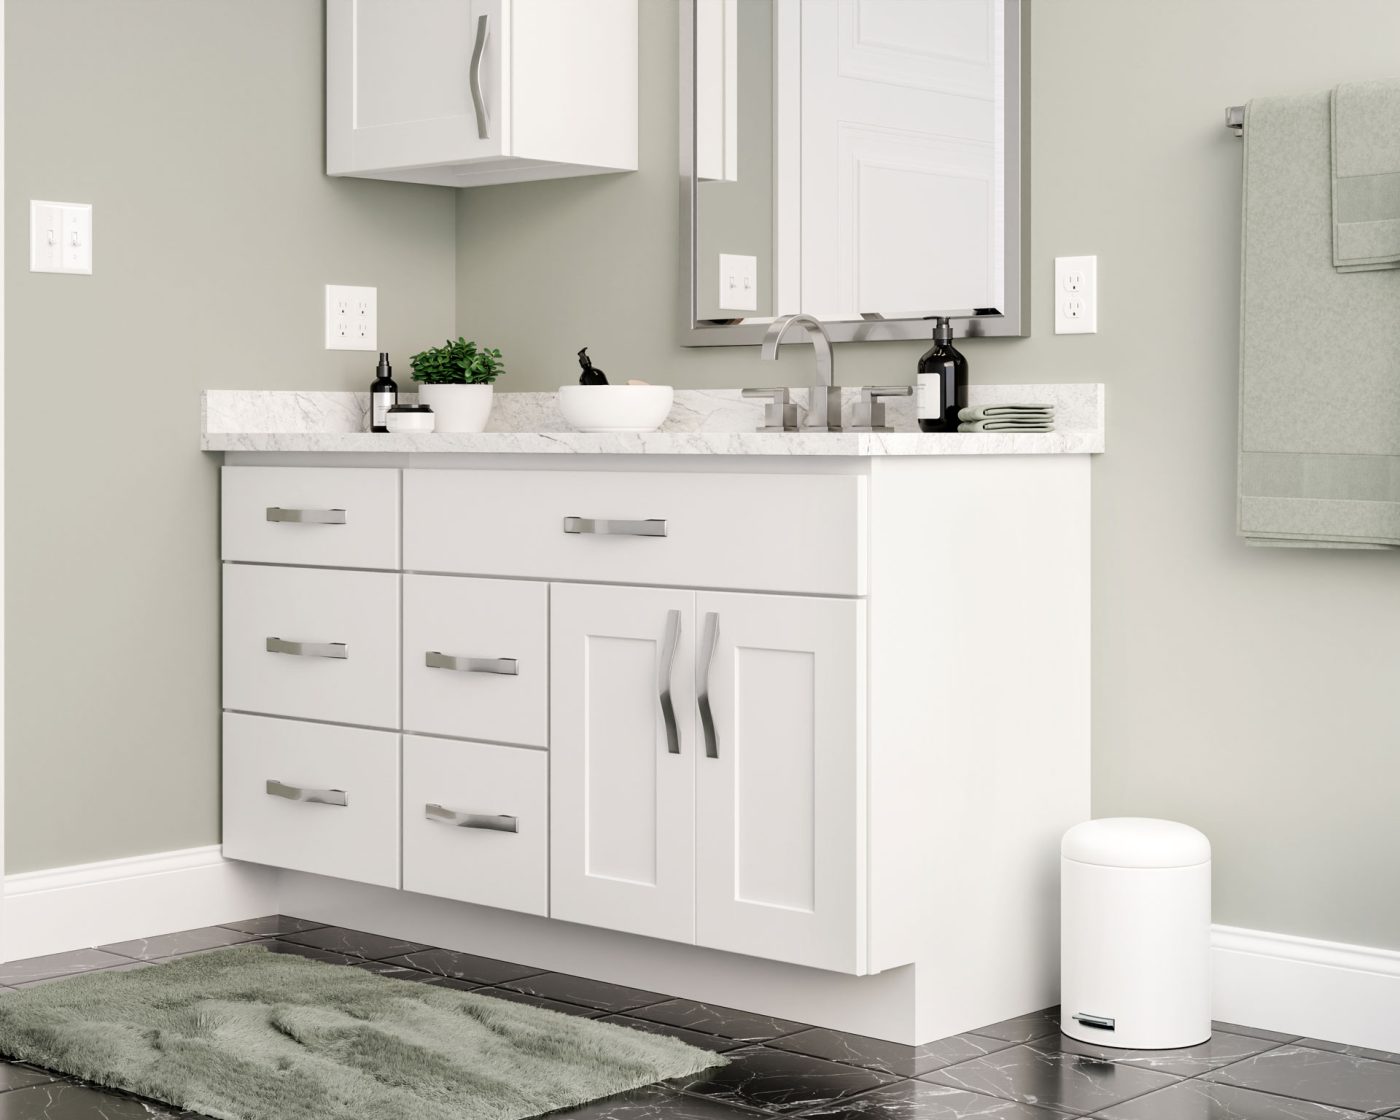 Jamestown white vanity bathroom cabinets for sale in South Bend Indiana